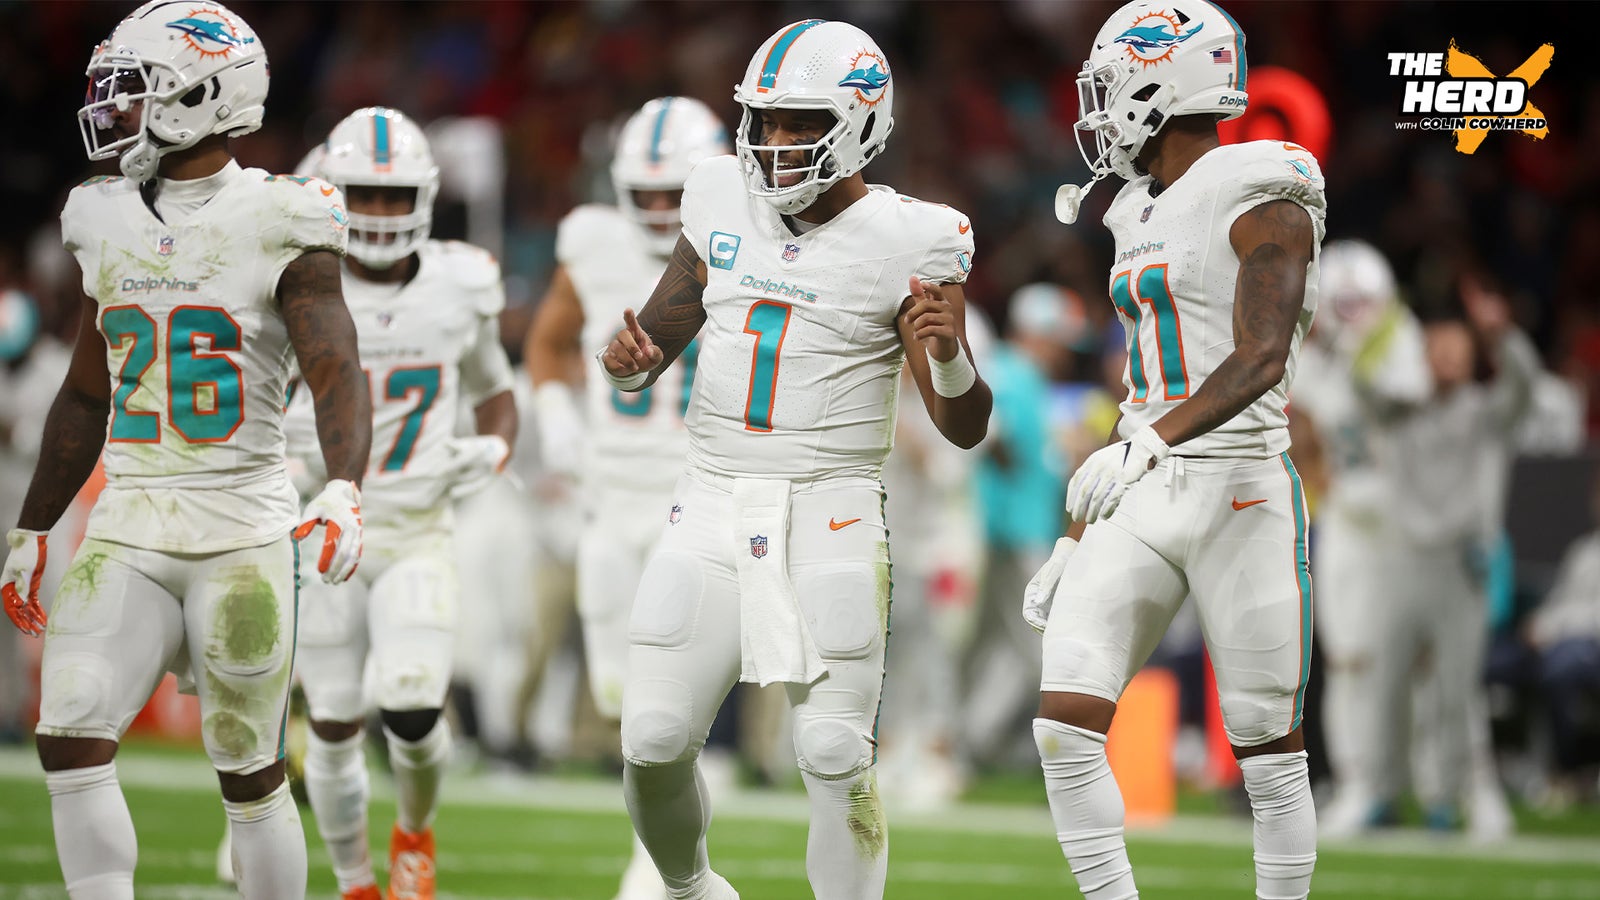 Dolphins proved they are not contenders in 21-14 loss to Chiefs